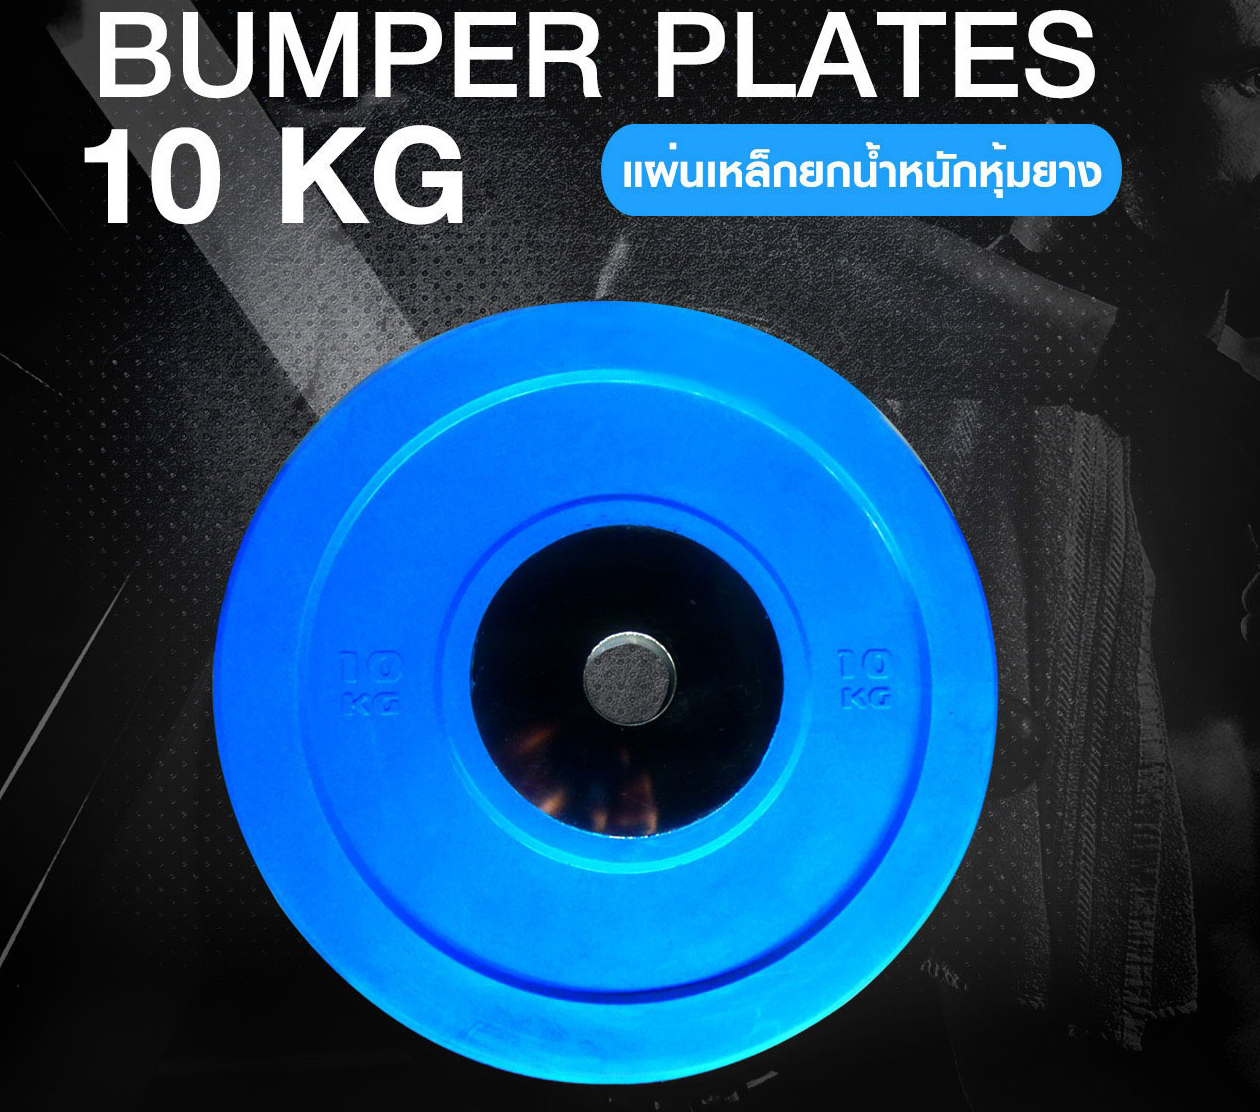 Olympic Weight Plates - BUMPER PLATES - 10 KG